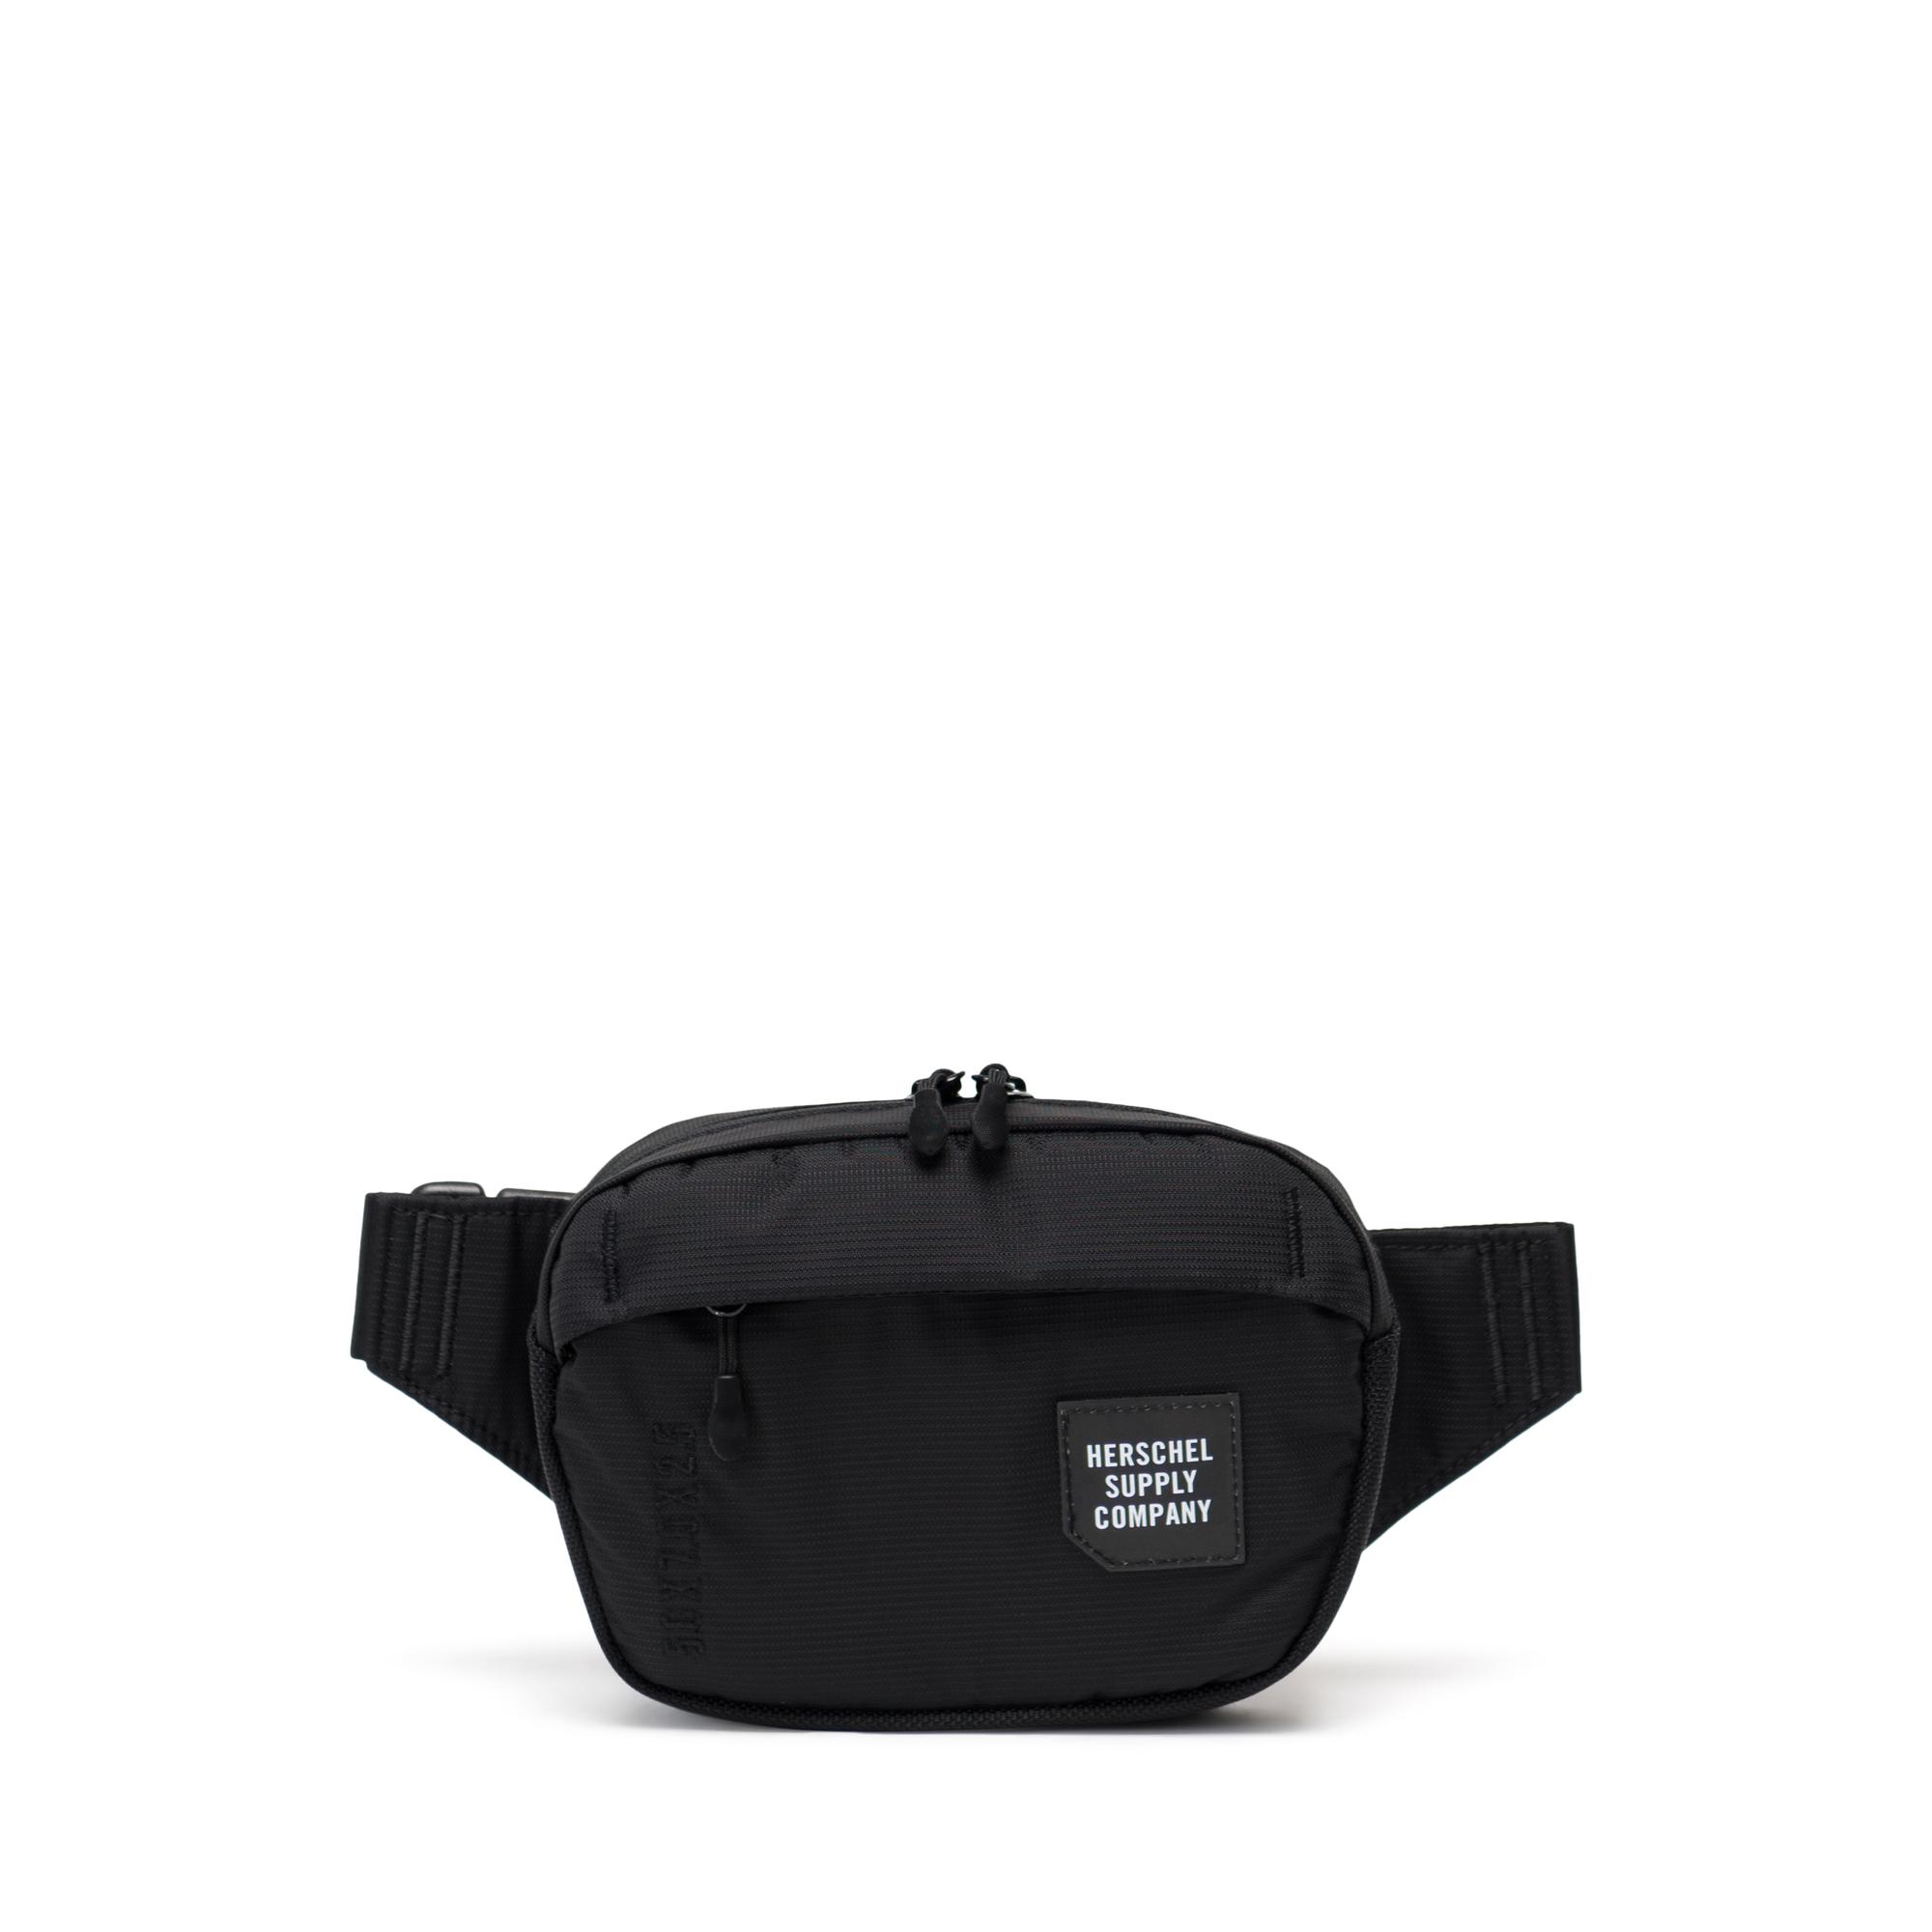 Tour Hip Pack Small | Herschel Supply Company